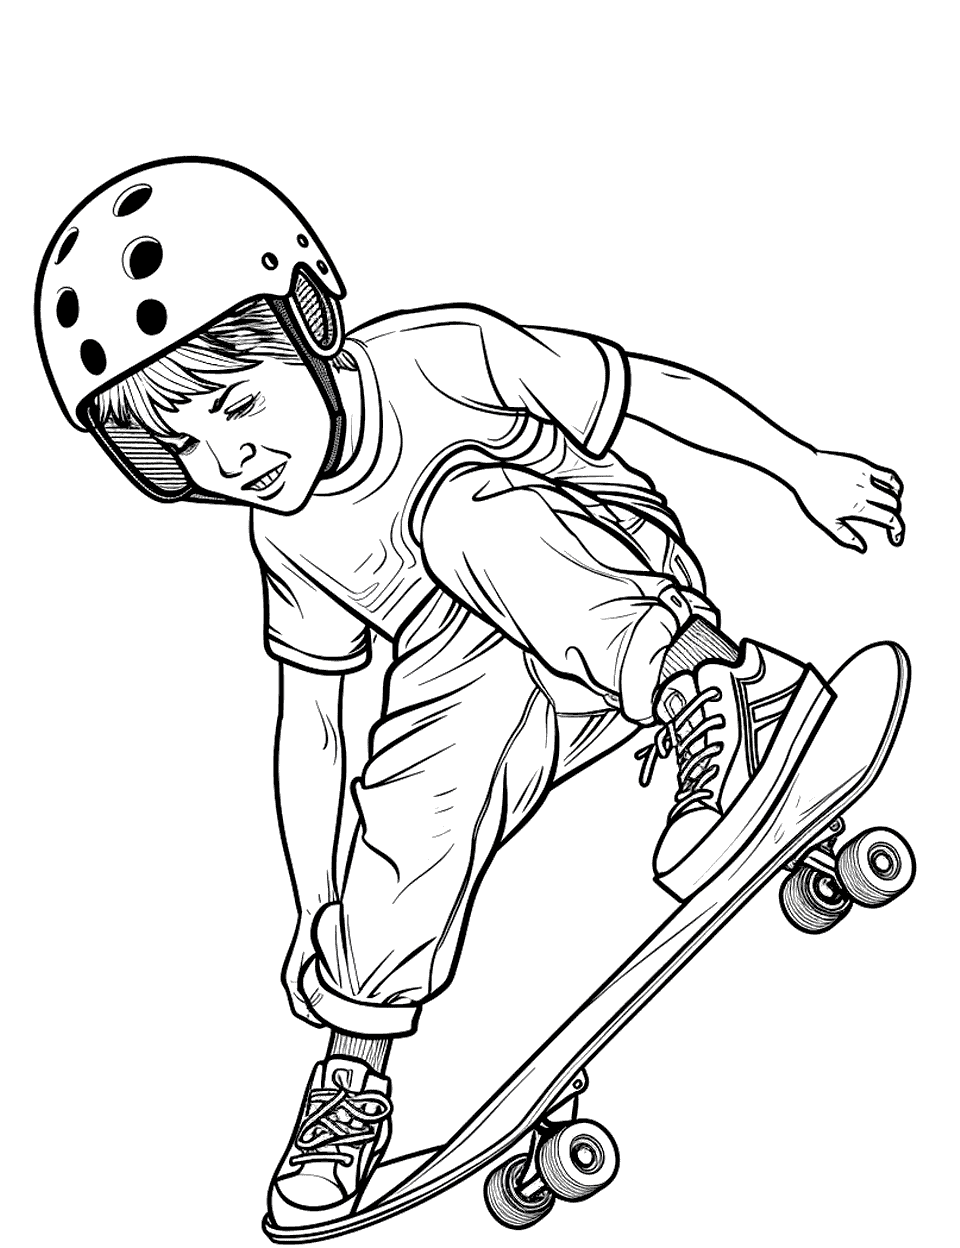 Skateboard Tricks in the Park Sports Coloring Page - A kid performing a kickflip on a skateboard at a skate park.